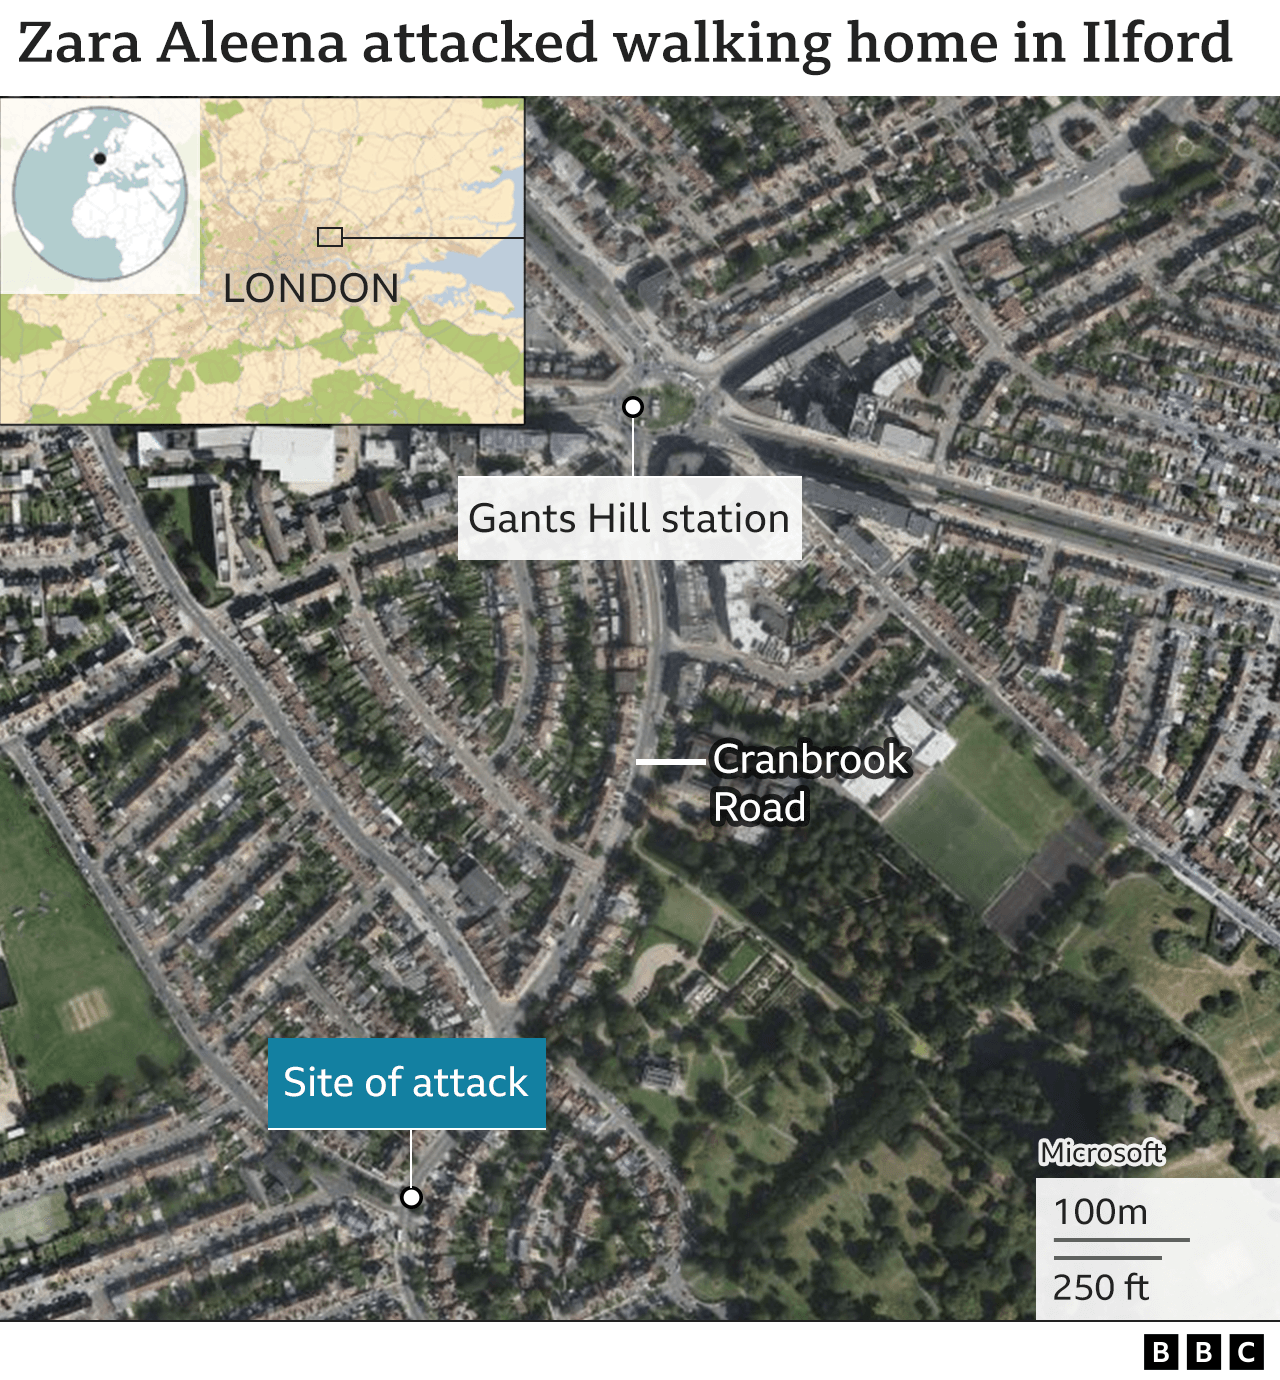 Map showing site of attack in Ilford